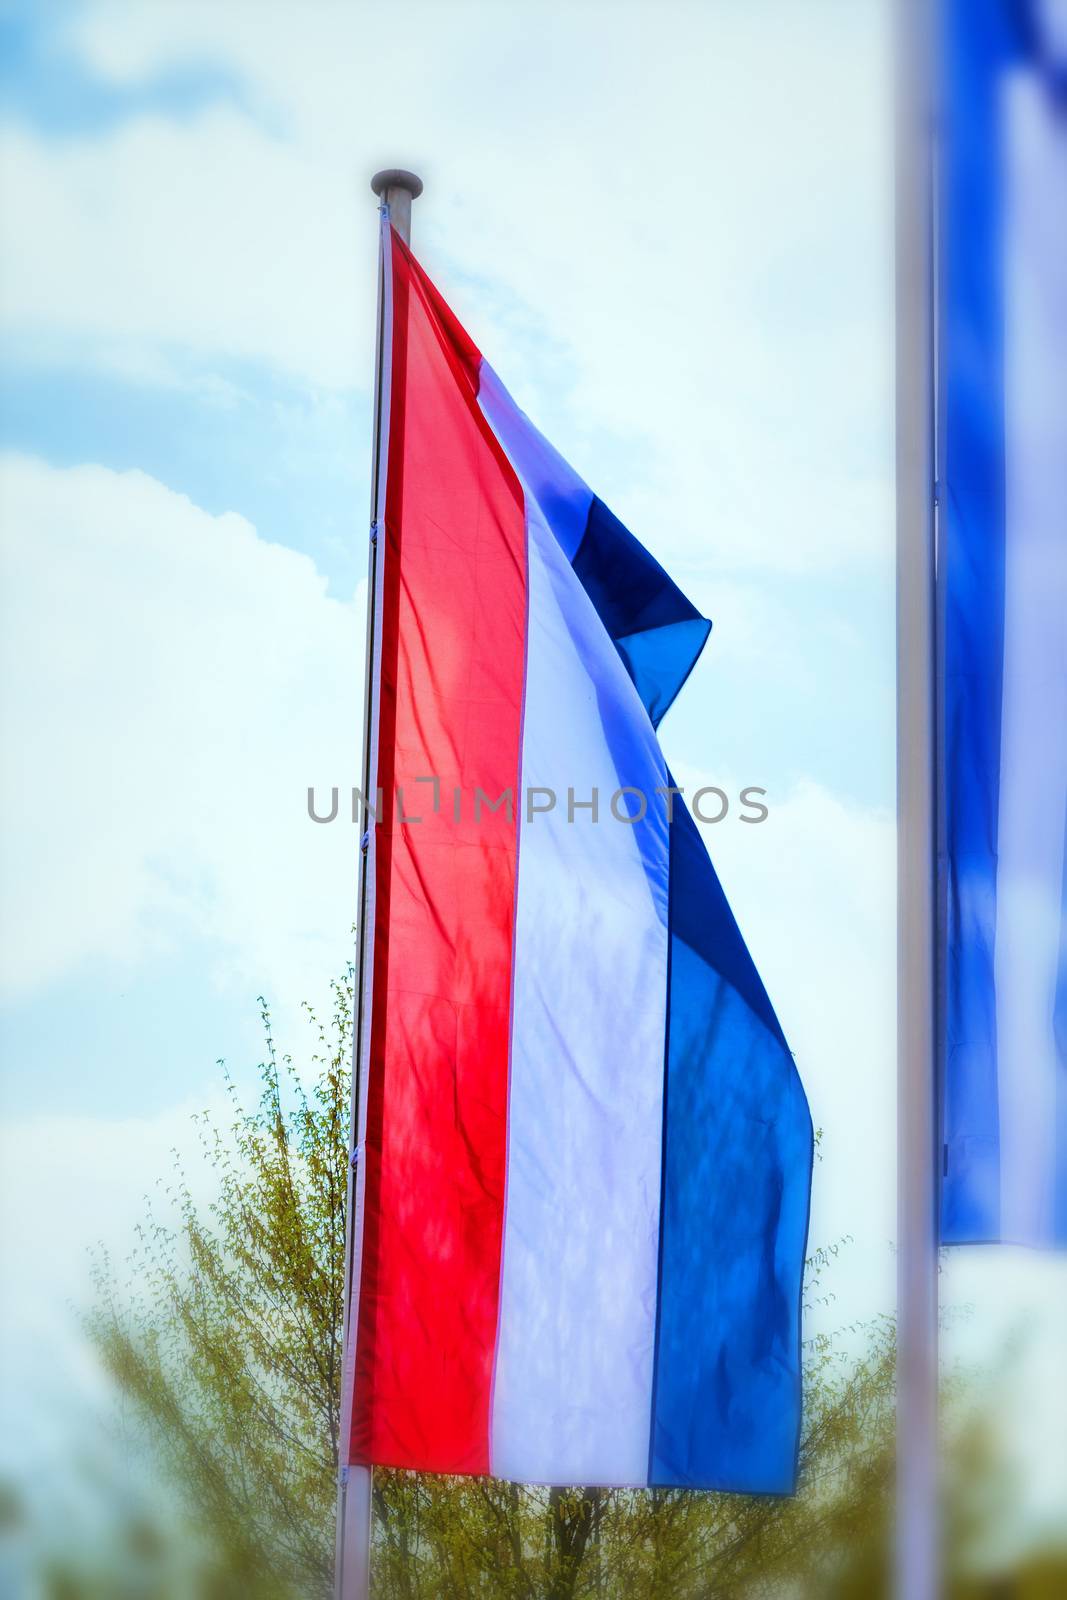 National flag of the Netherlands, Holland in high format with motion blur in the background.